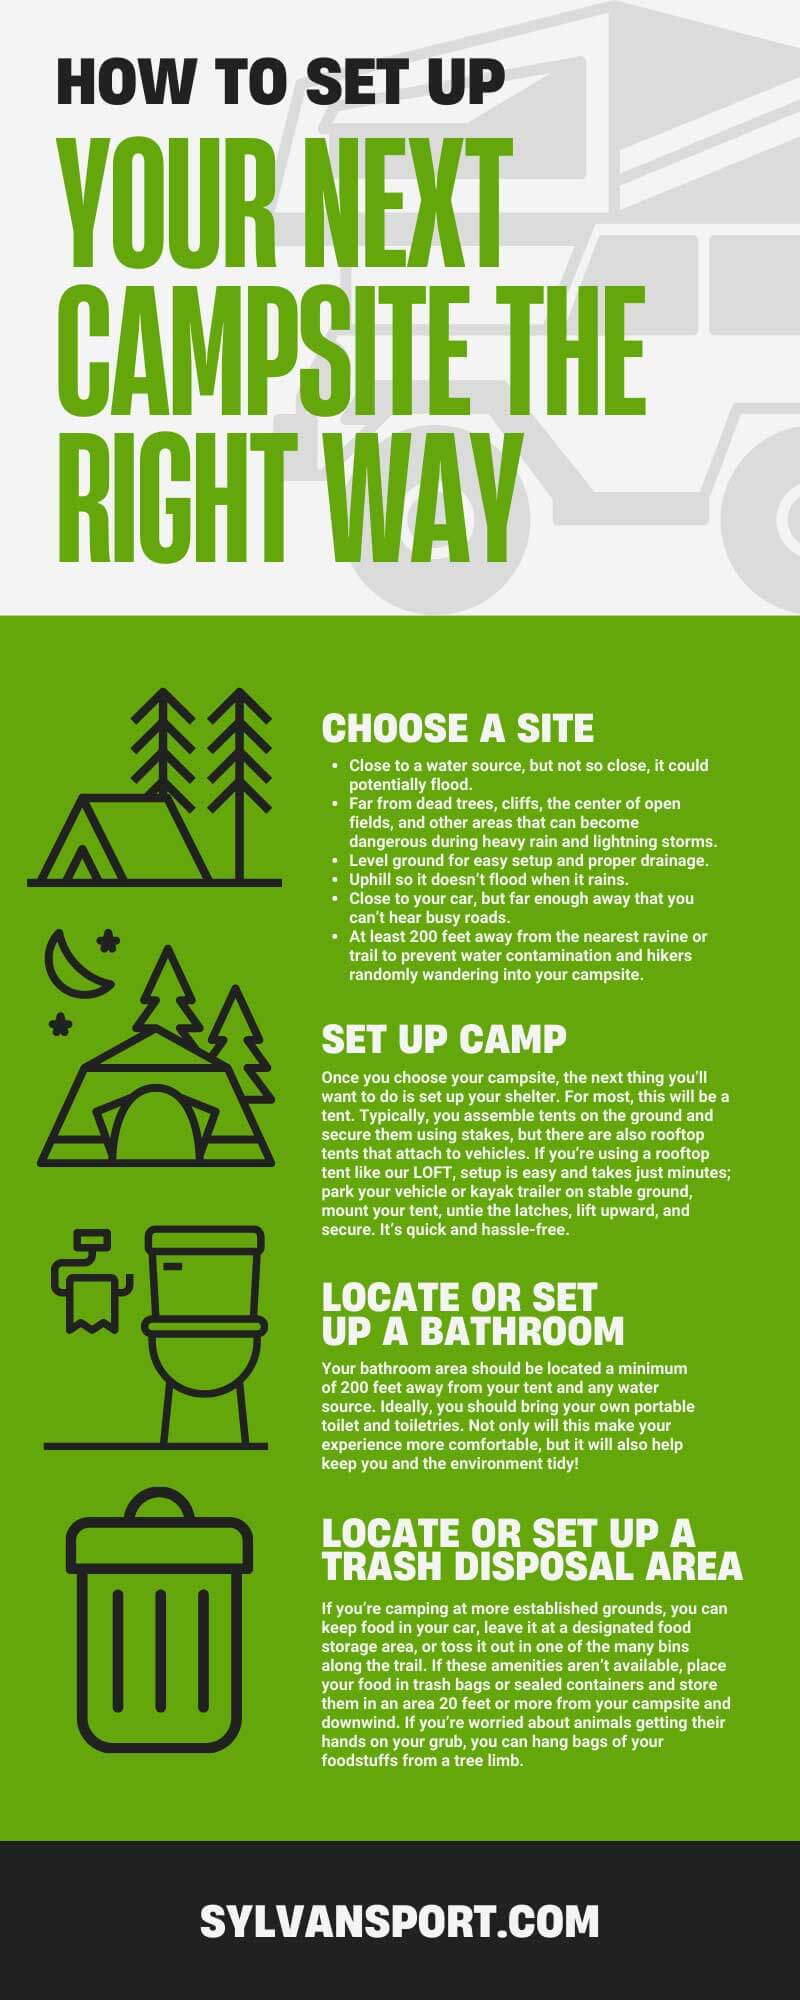 How To Set Up Your Next Campsite the Right Way